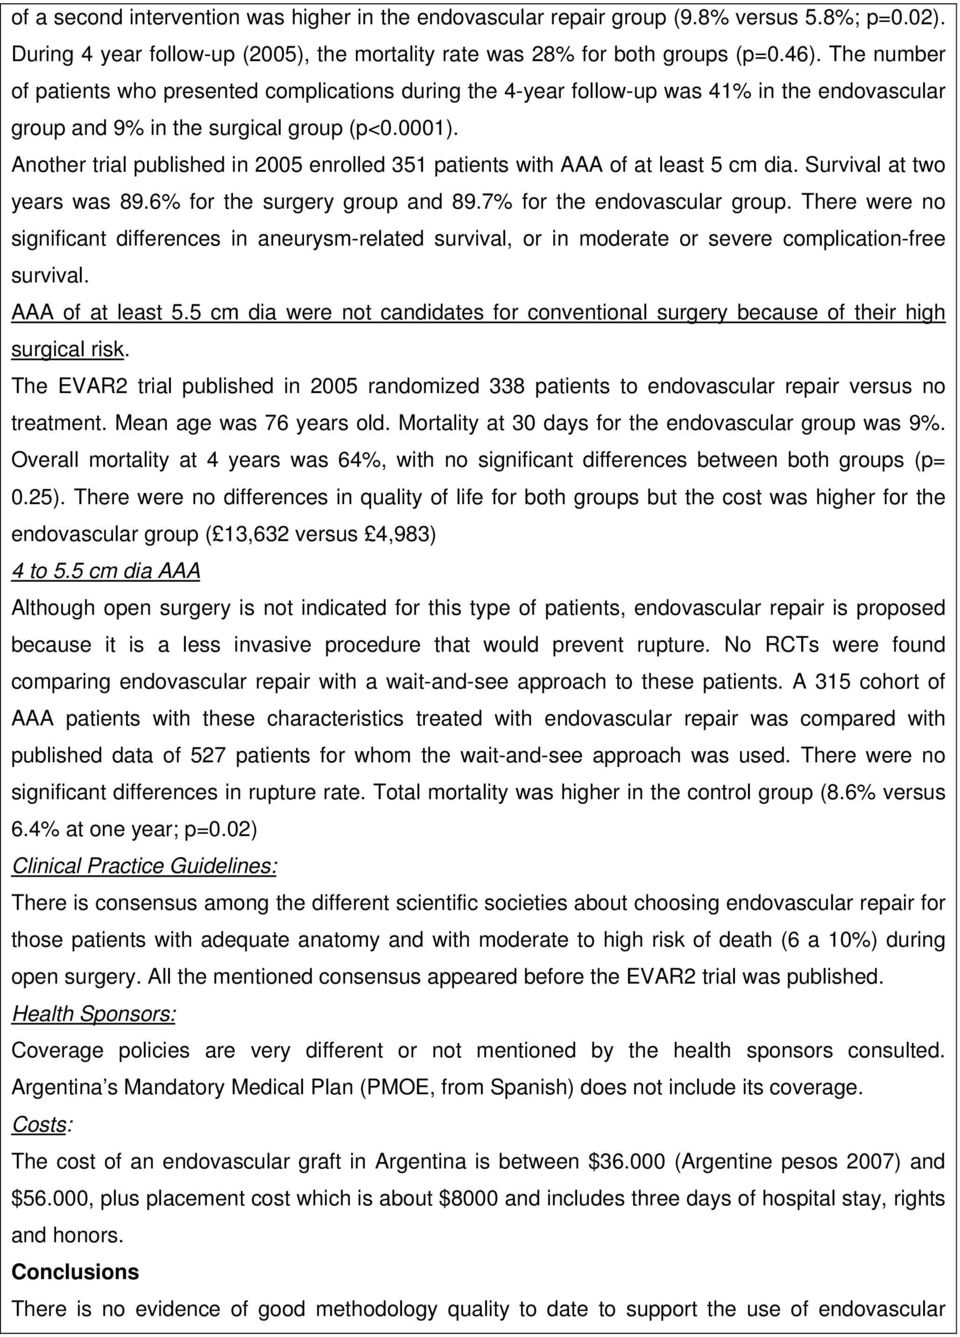 Another trial published in 2005 enrolled 351 patients with AAA of at least 5 cm dia. Survival at two years was 89.6% for the surgery group and 89.7% for the endovascular group.